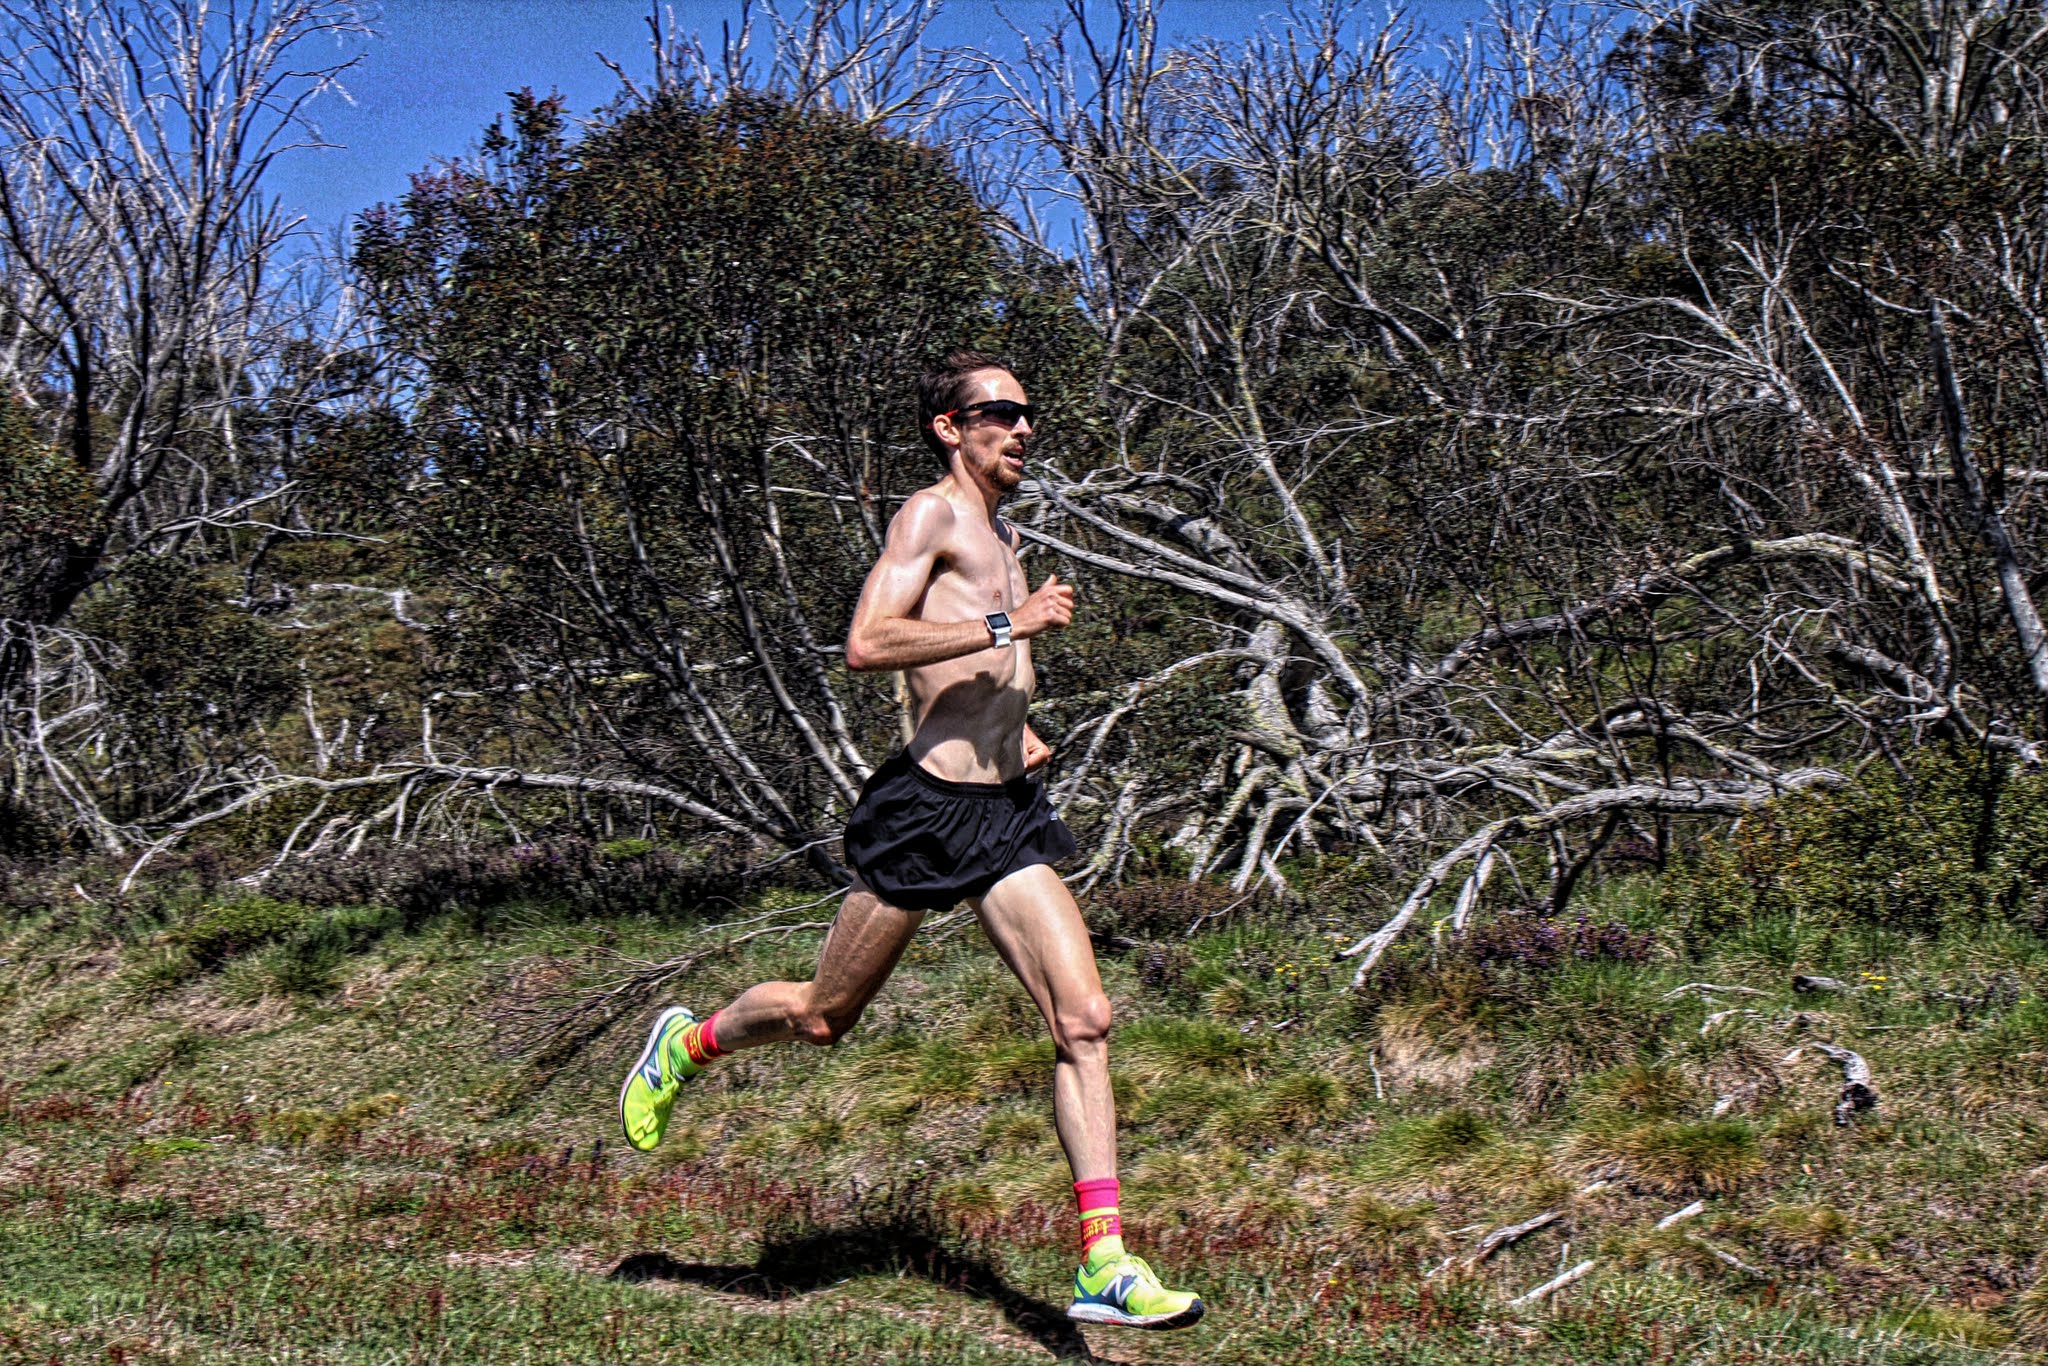 McNeill training at altitude, Falls Creek Victoria earlier this year with MTC